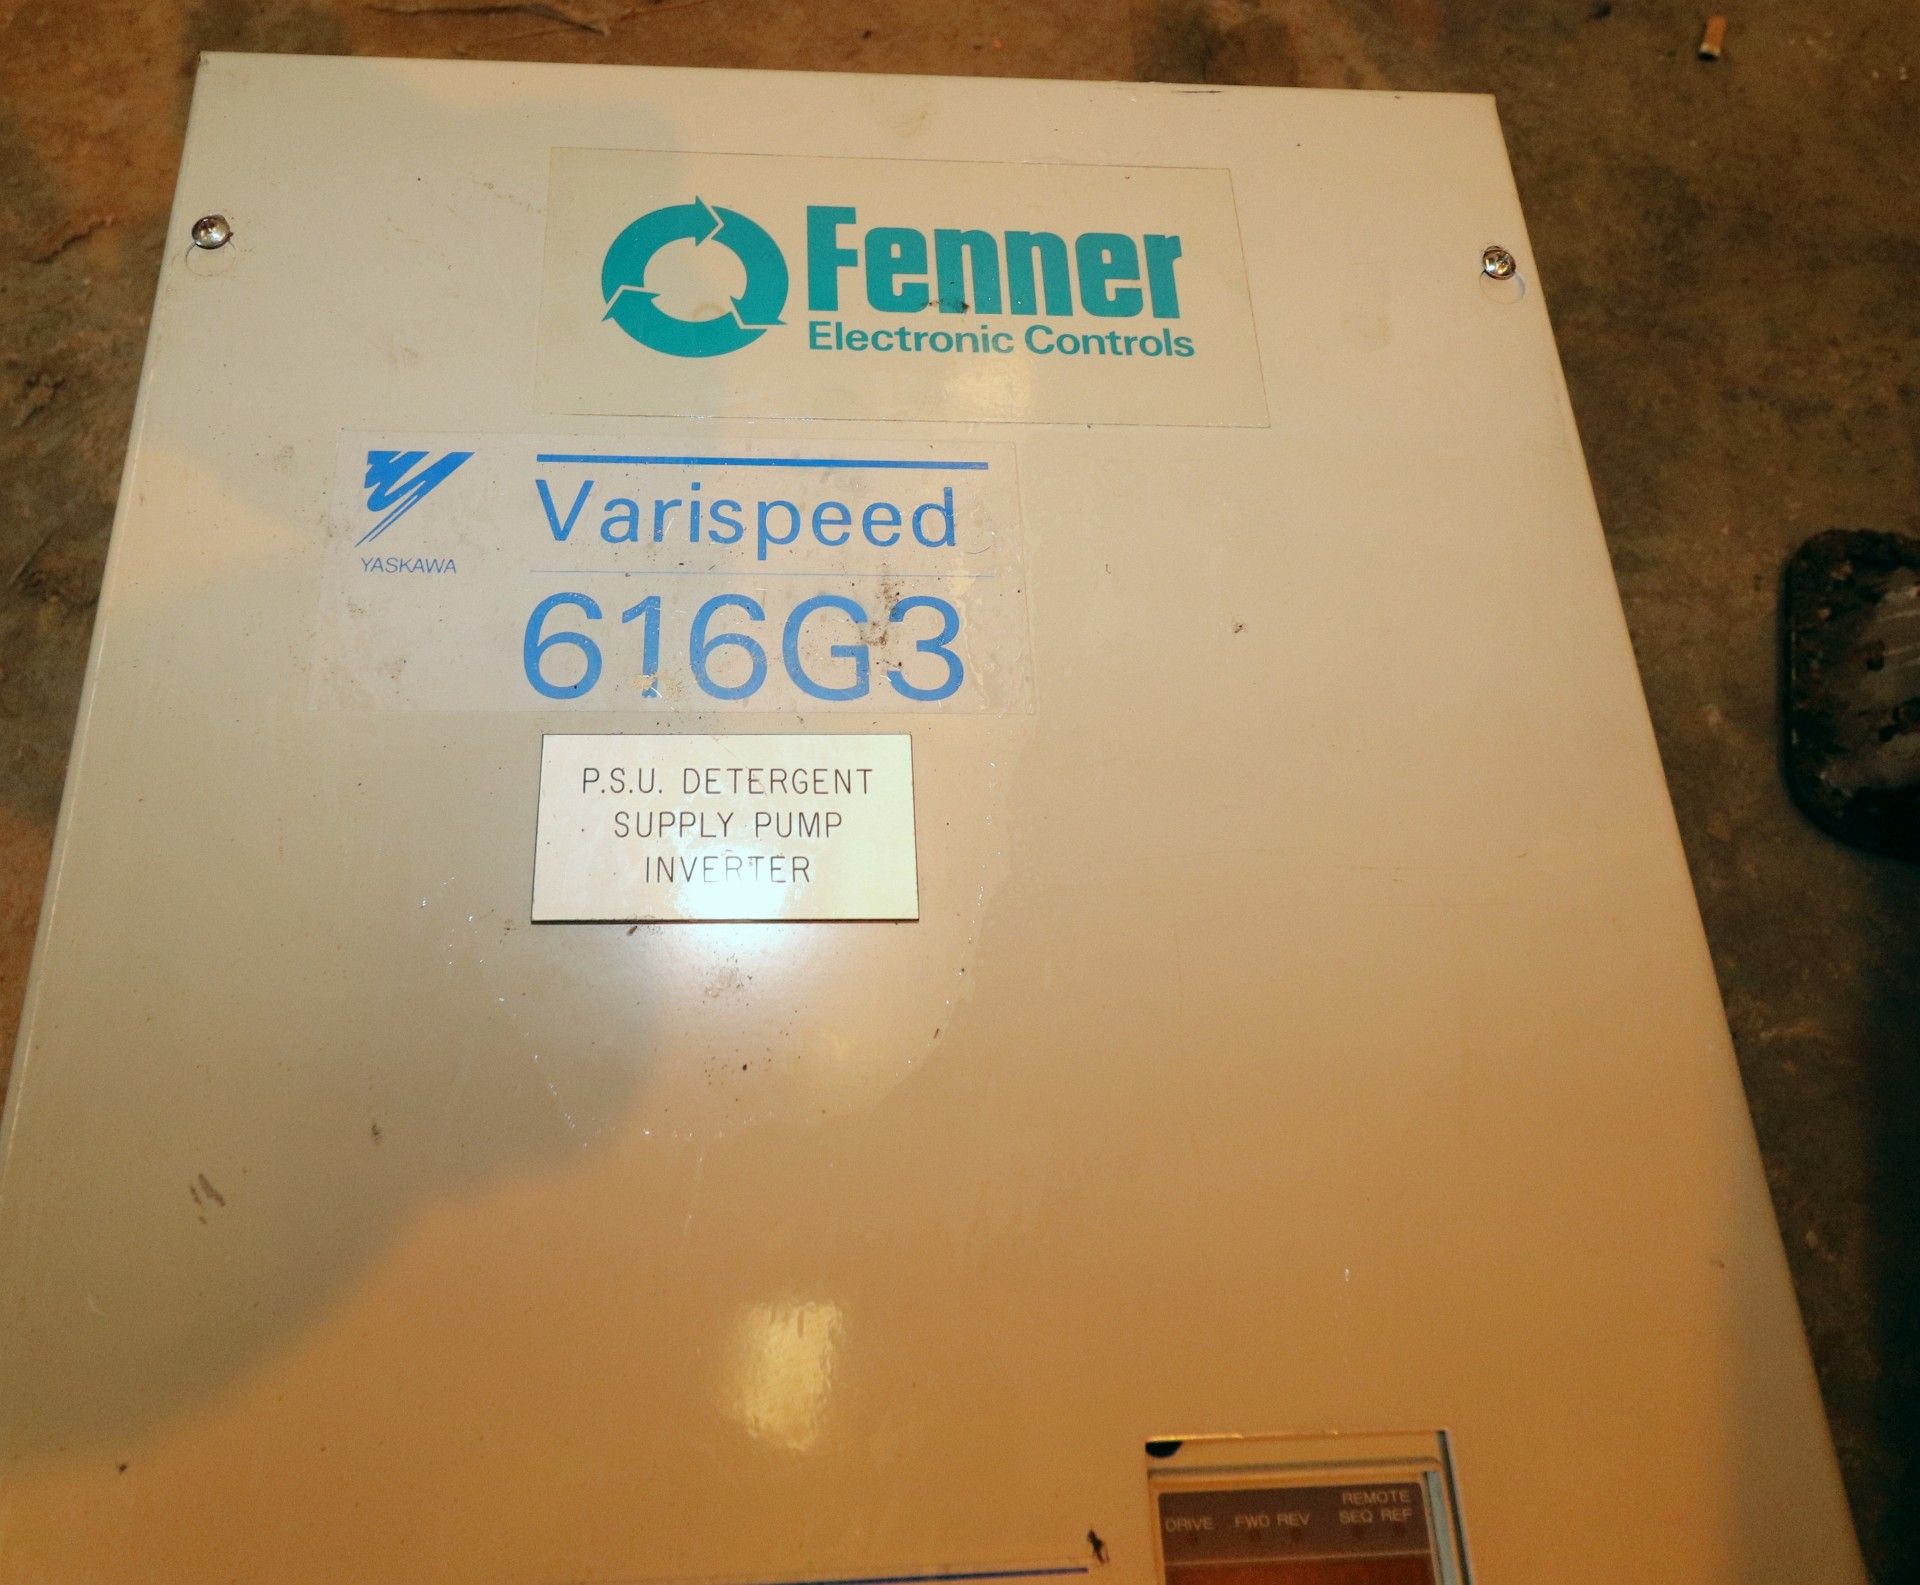 YASKAWA CIMR-G3E403 3ph Variable Frequency Speed Drive Inverter 30KVA - Image 3 of 6